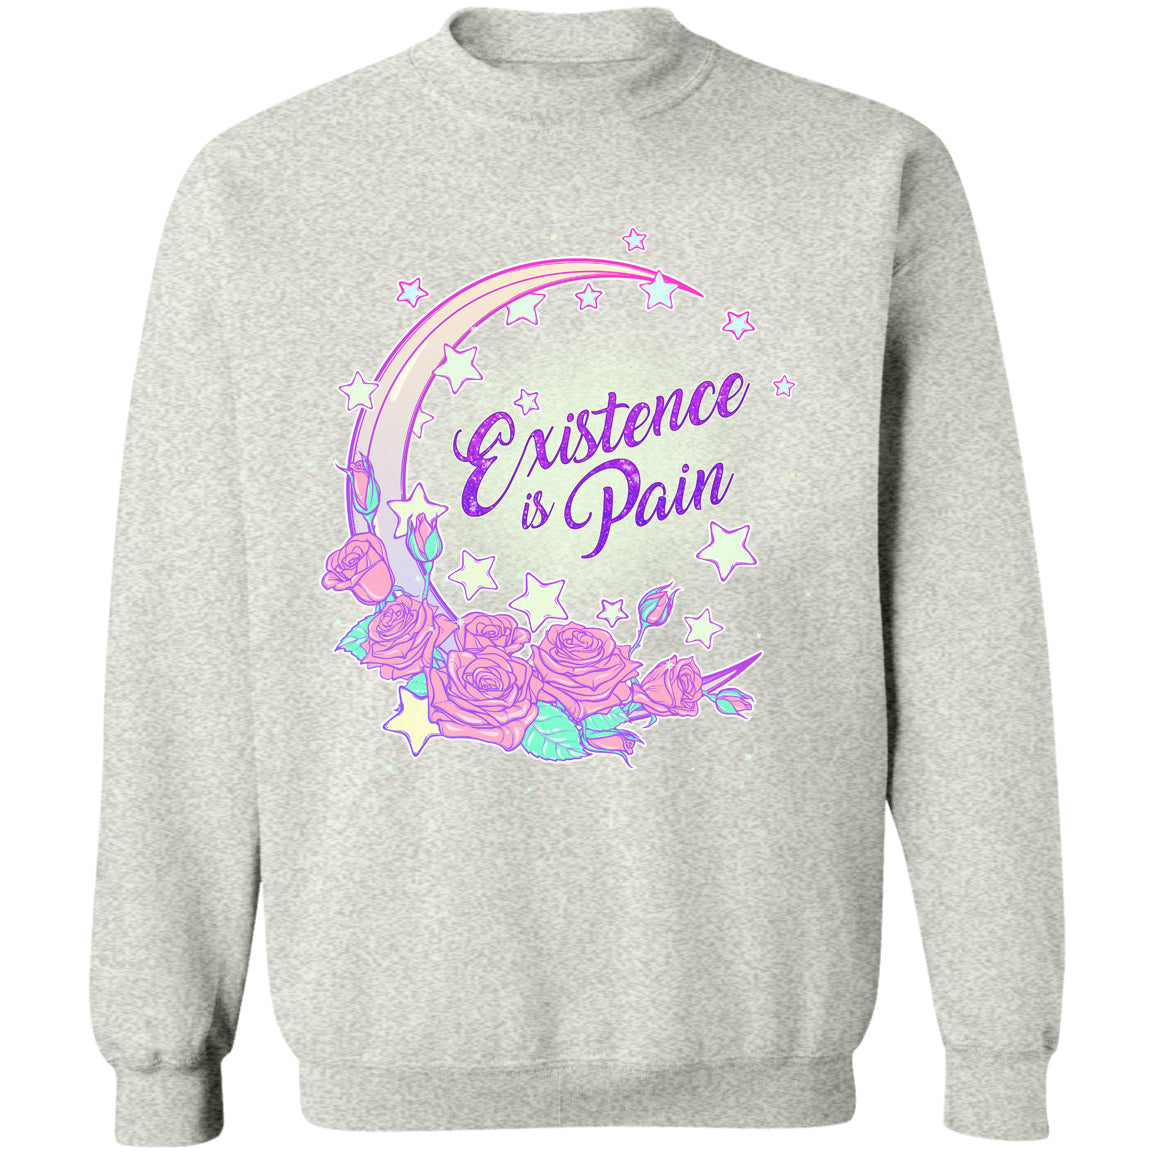 Existence is Pain Crewneck Sweatshirt by palm-treat.myshopify.com for sale online now - the latest Vaporwave &amp; Soft Grunge Clothing